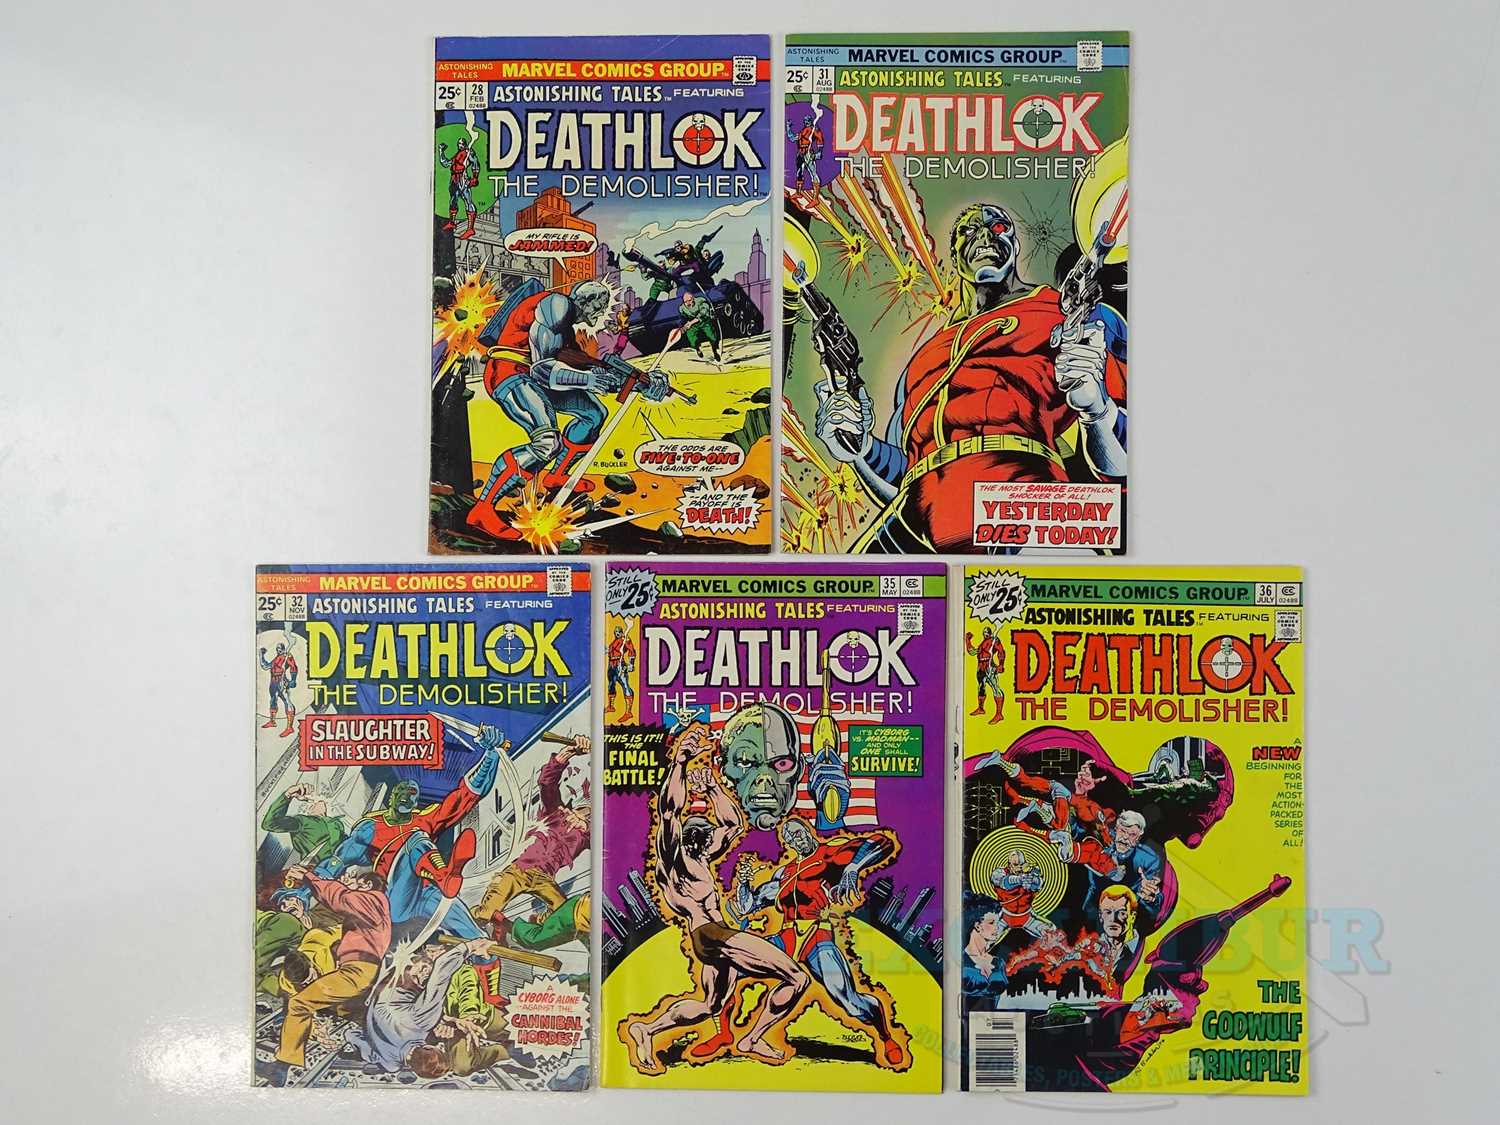 ASTONISHING TALES: DEATHLOK LOT (5 in Lot) - (1975/76 - MARVEL) Includes Issues #28, 31, 32, 35,